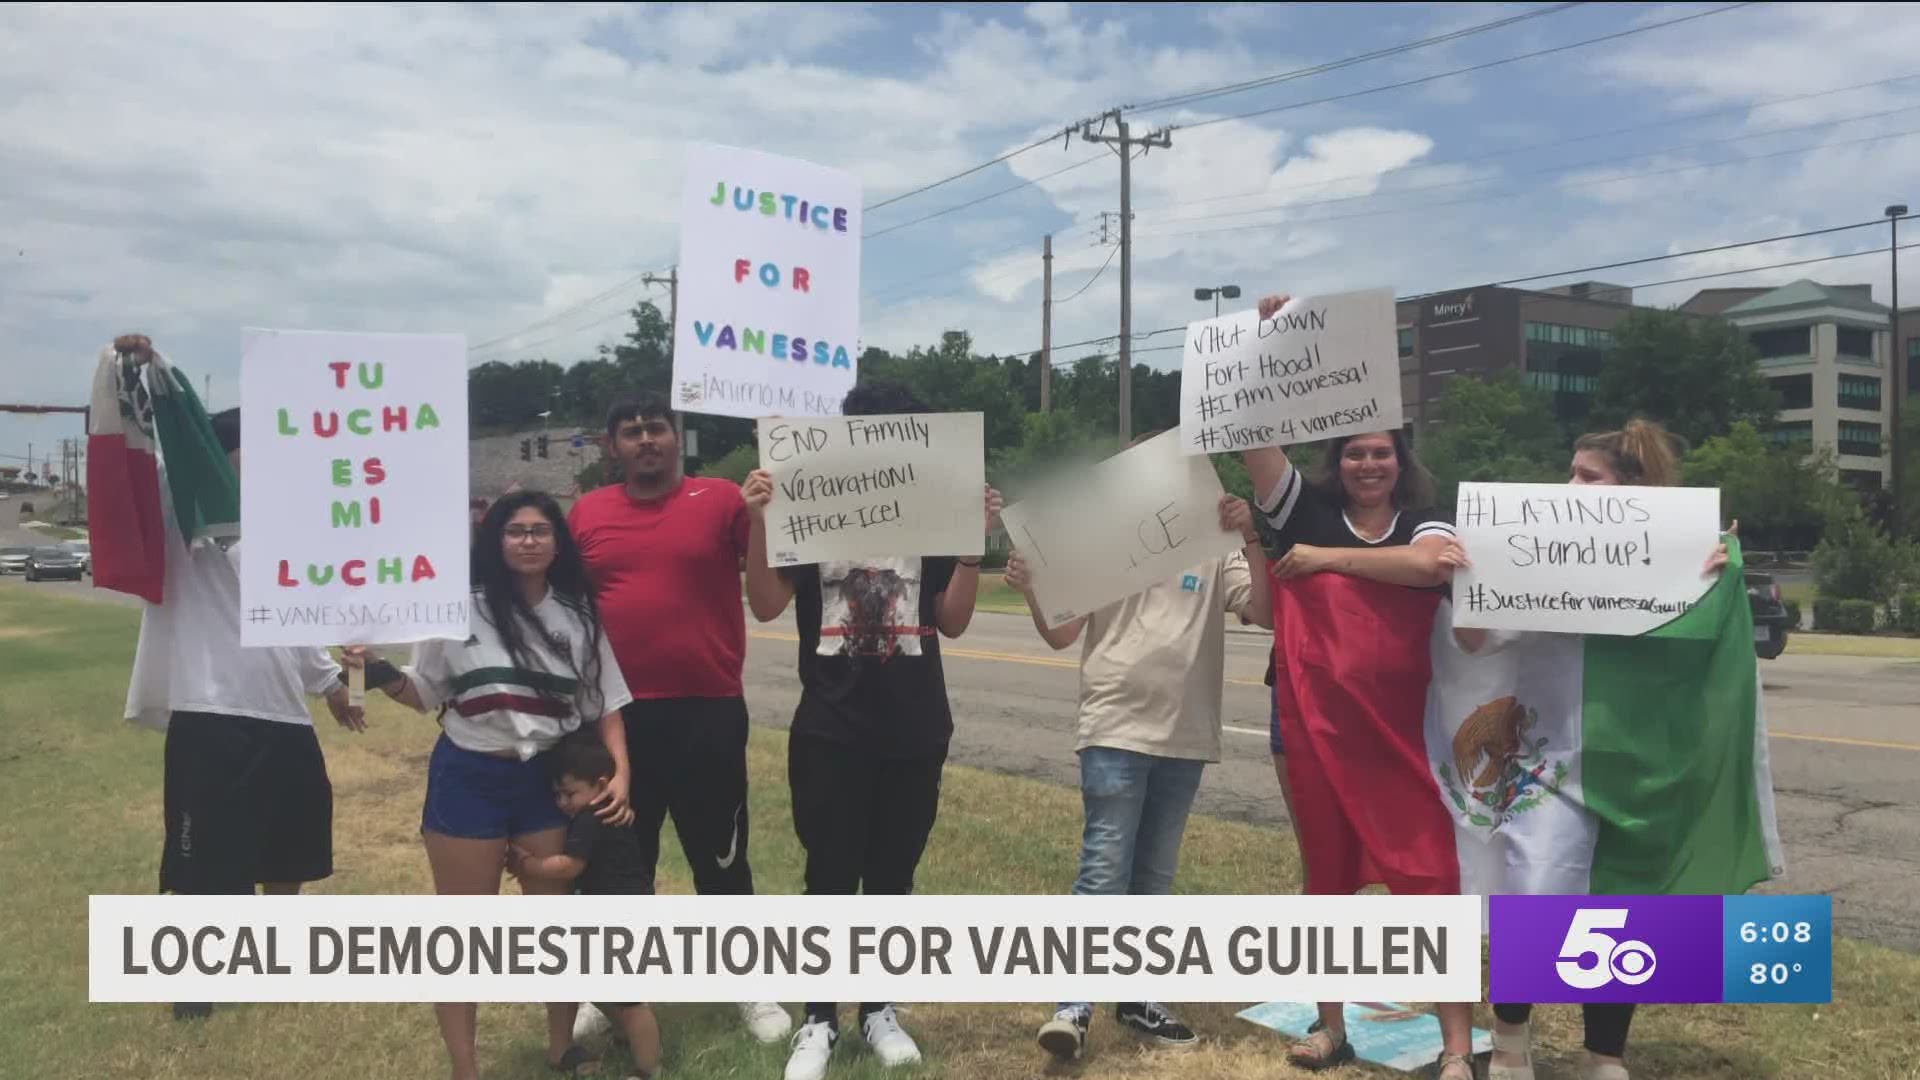 Protests for Vanessa Guillen in our area.